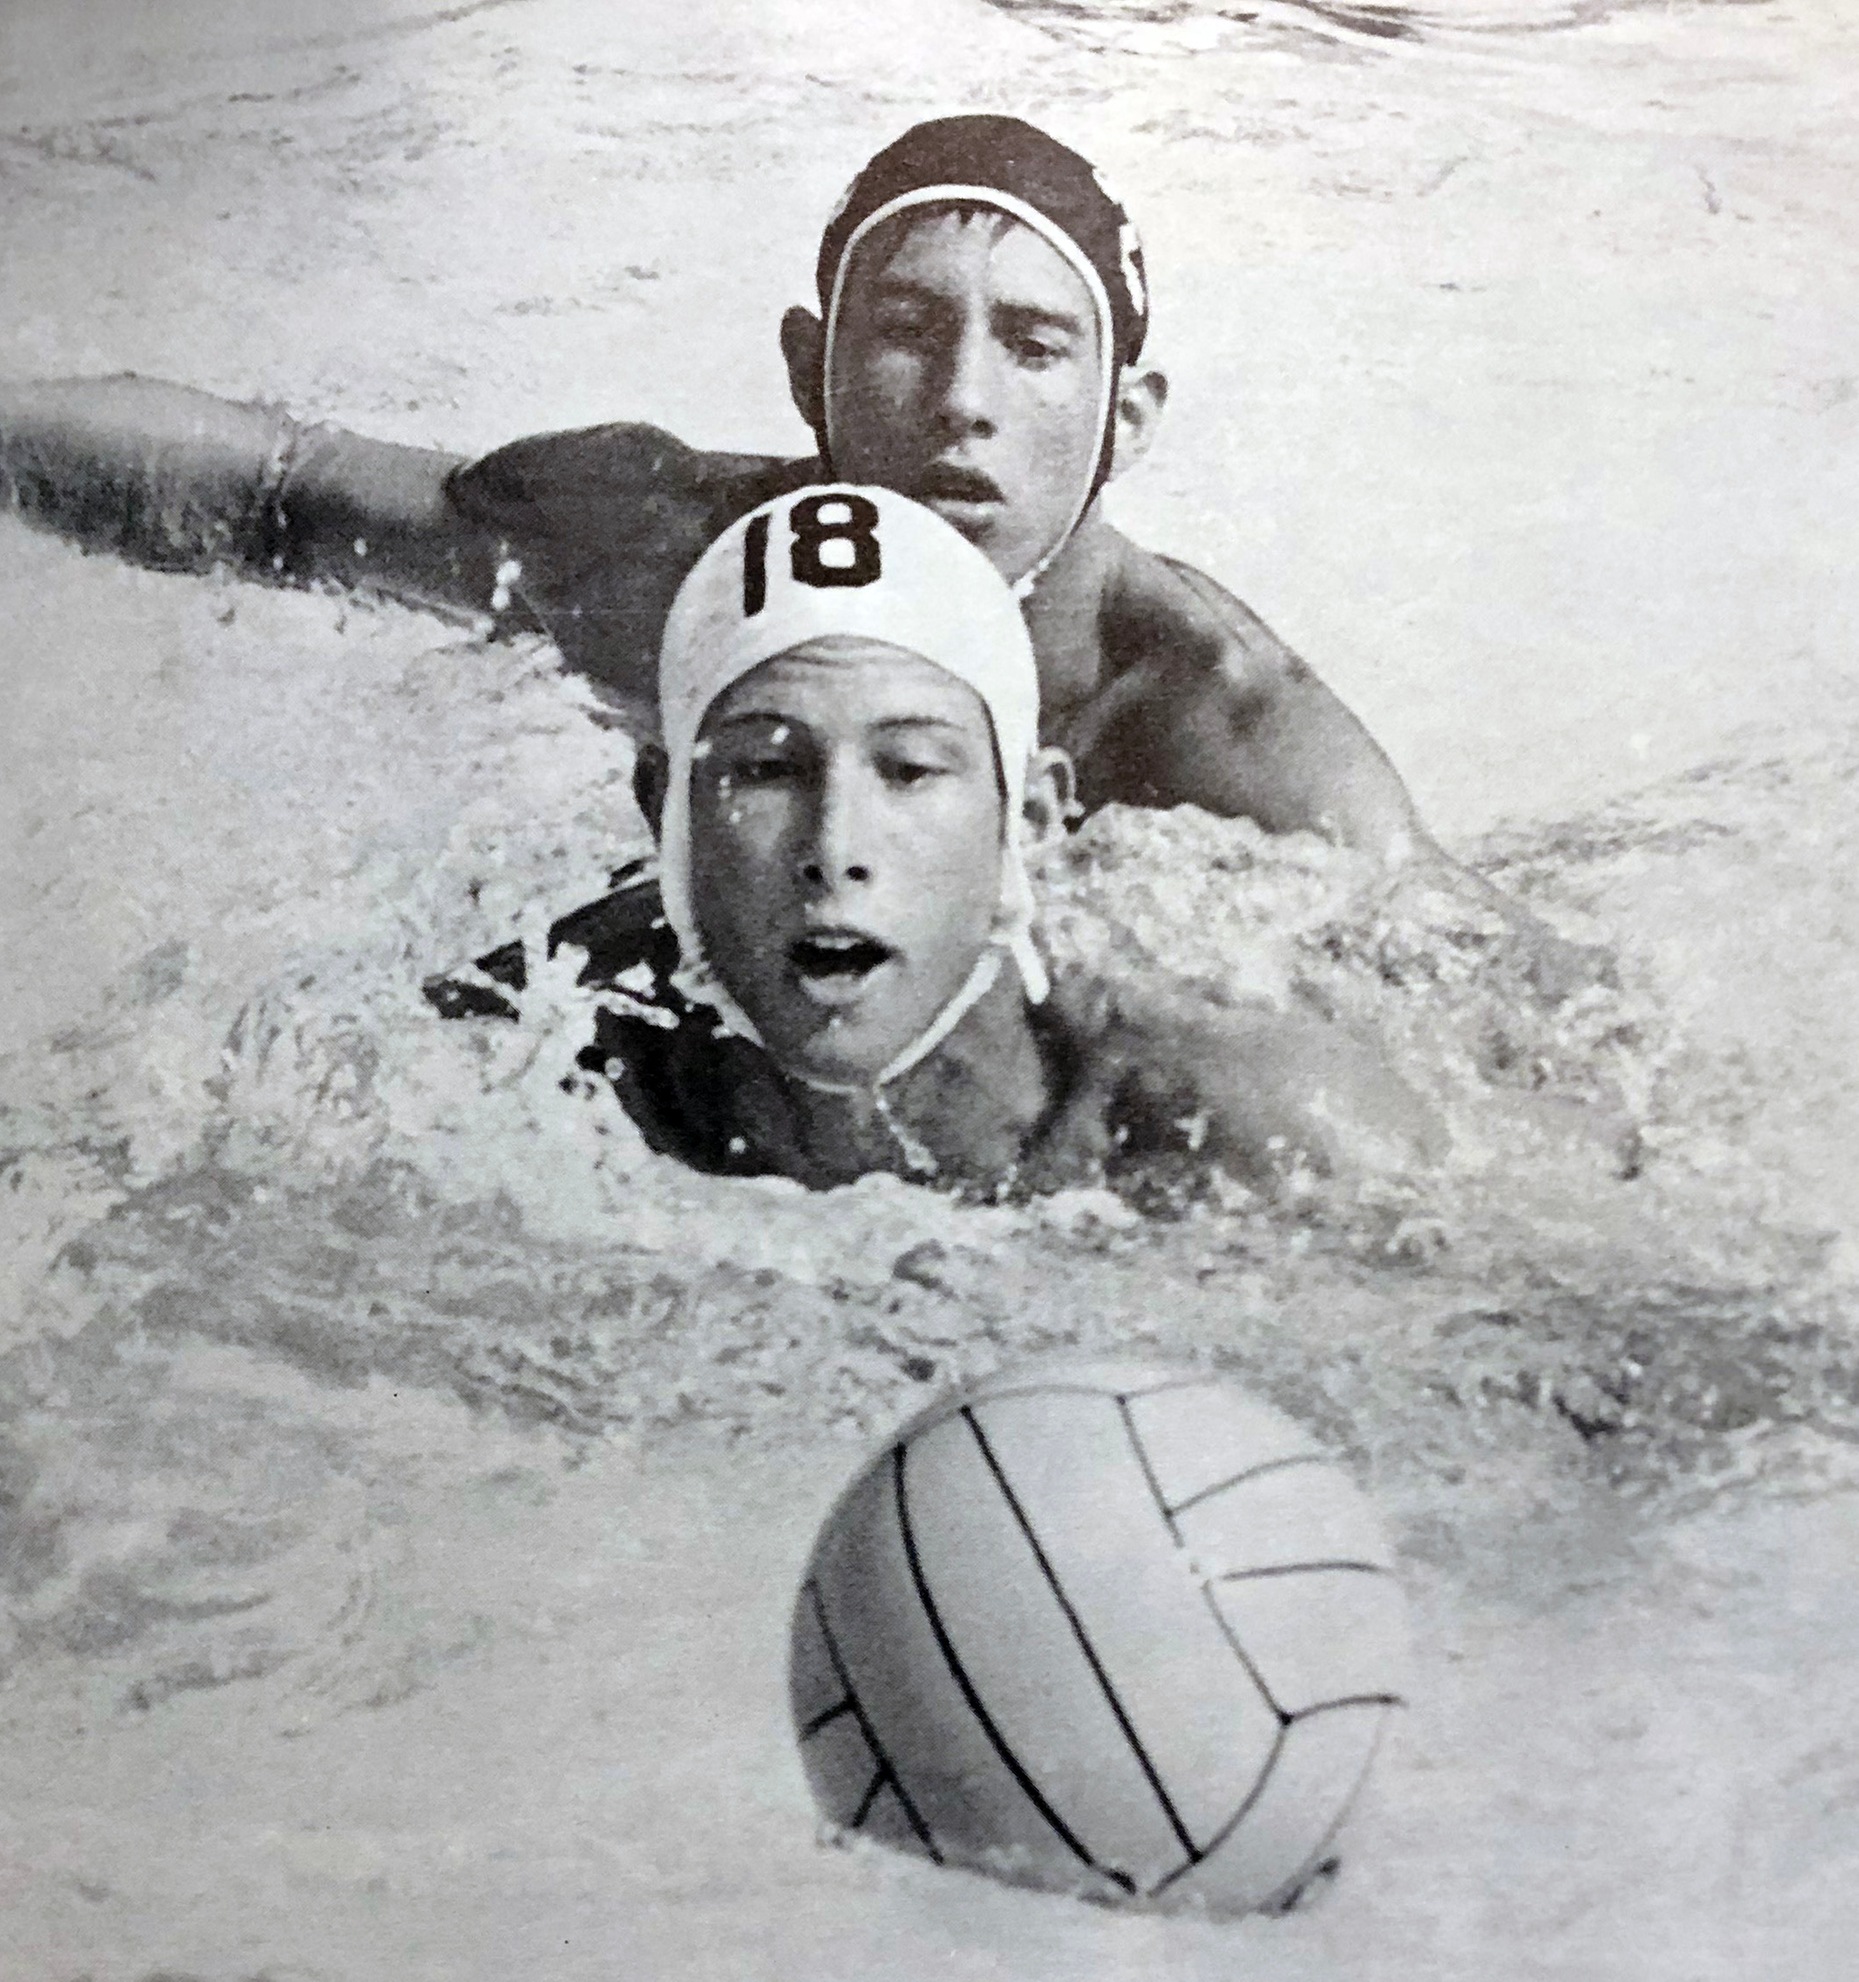 Action shot from 1968 water polo